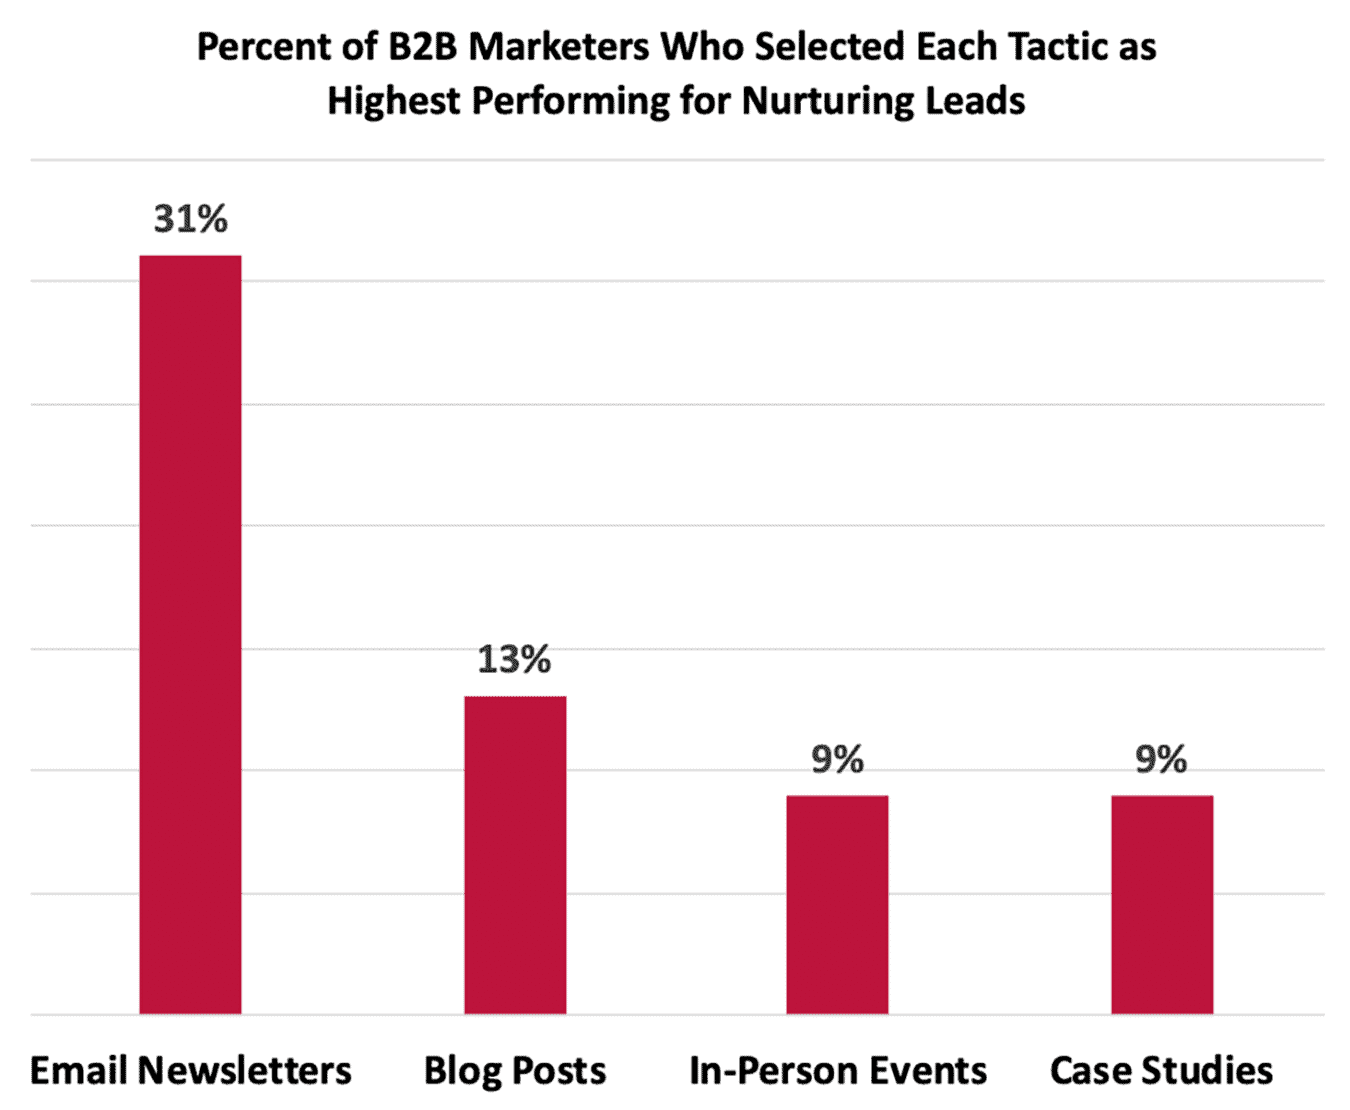 email newsletter lead nurturing is the top performing marketing tactic according to 31% of B2B marketers surveyed. The other top tactics were blog posts at 13% and in-person events and case studies at 9% each